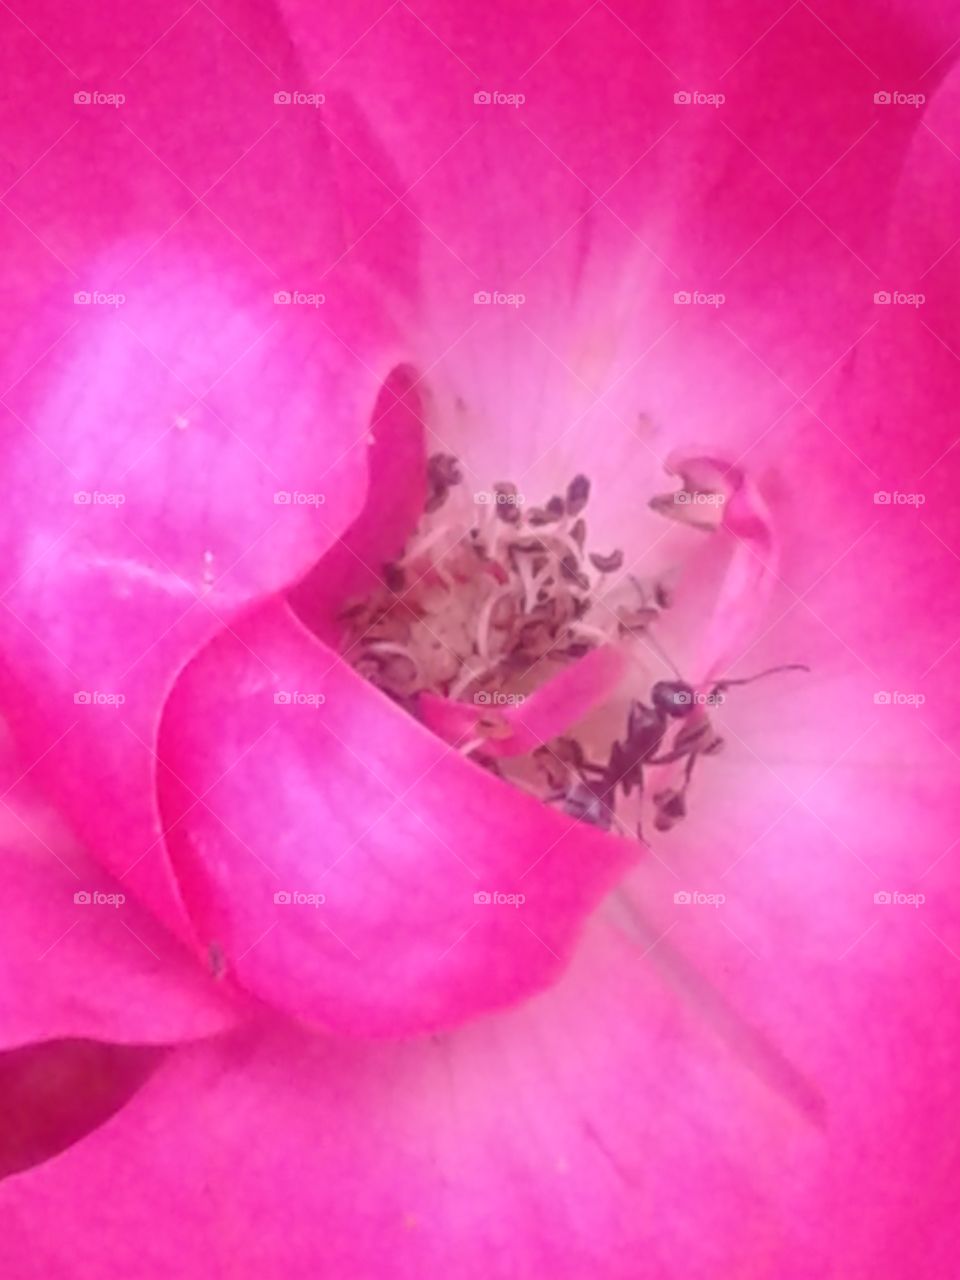 ant on a rose